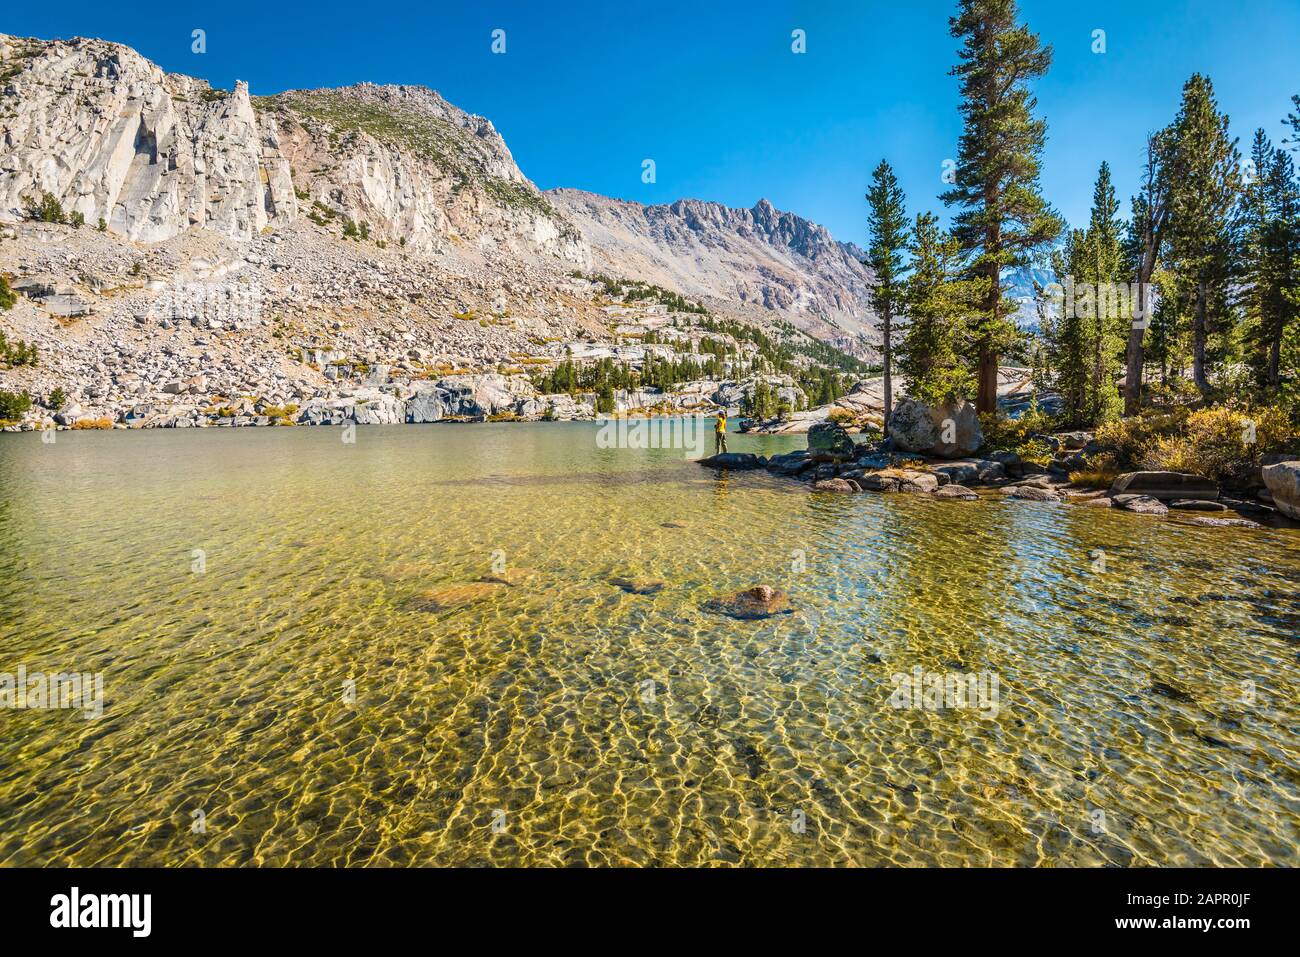 A hiker stands along the shore of Blue Lake, John Muir Wilderness, CA. Shear mountain peaks surround the green-blue lake. Stock Photo